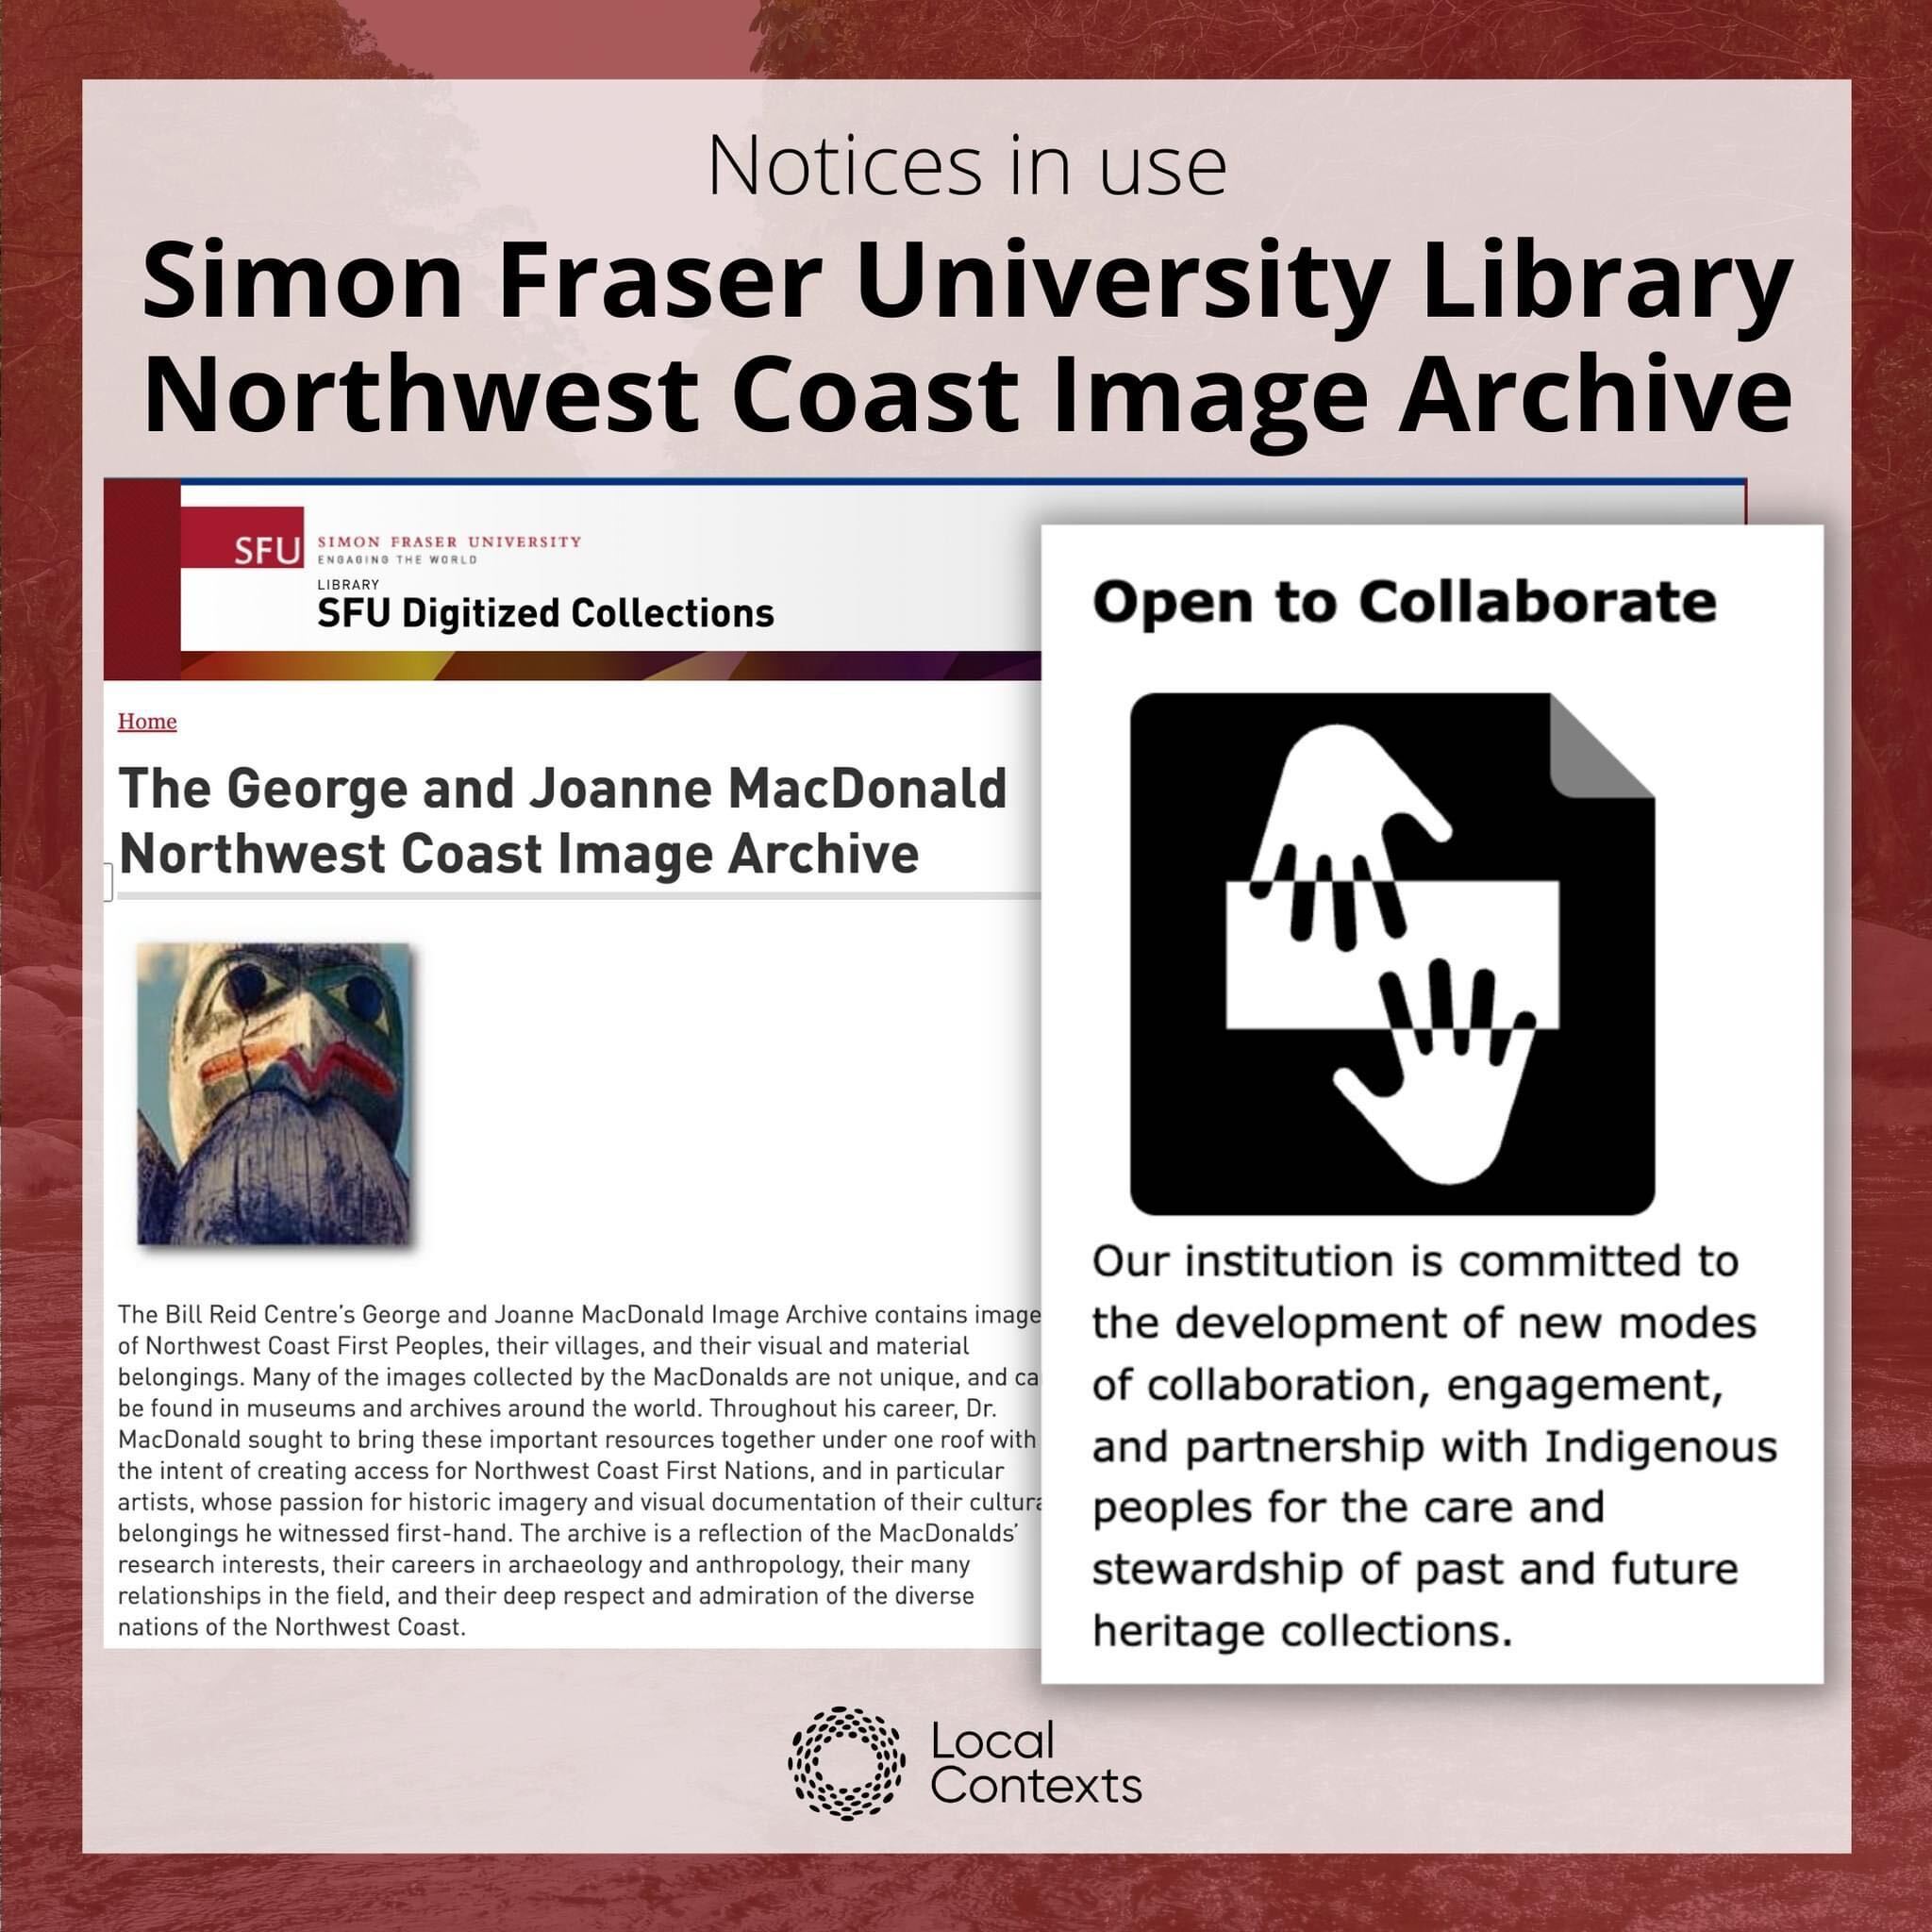 Black text on dark red decorative background: “Notices in use. Simon Fraser University Library Northwest Coast Image Archive.” In the center are two screenshots. In the background, one shows a screenshot of the landing page of the “SFU Digitized Collections, The George and Joanne MacDonald Northwest Coast Image Archive,” which is text with a small image of a close-up of a monumental carving. The second screenshot is on top and shows the Open to Collaborate Notice icon, a black square icon with two hands facing each other, next to the Notice text: “Open to Collaborate. Our institution is committed to the development of new modes of collaboration, engagement, and partnership with Indigenous peoples for the care and stewardship of past and future heritage collections.” At the bottom of the post in black is the Local Contexts logo, a ring made of dots.